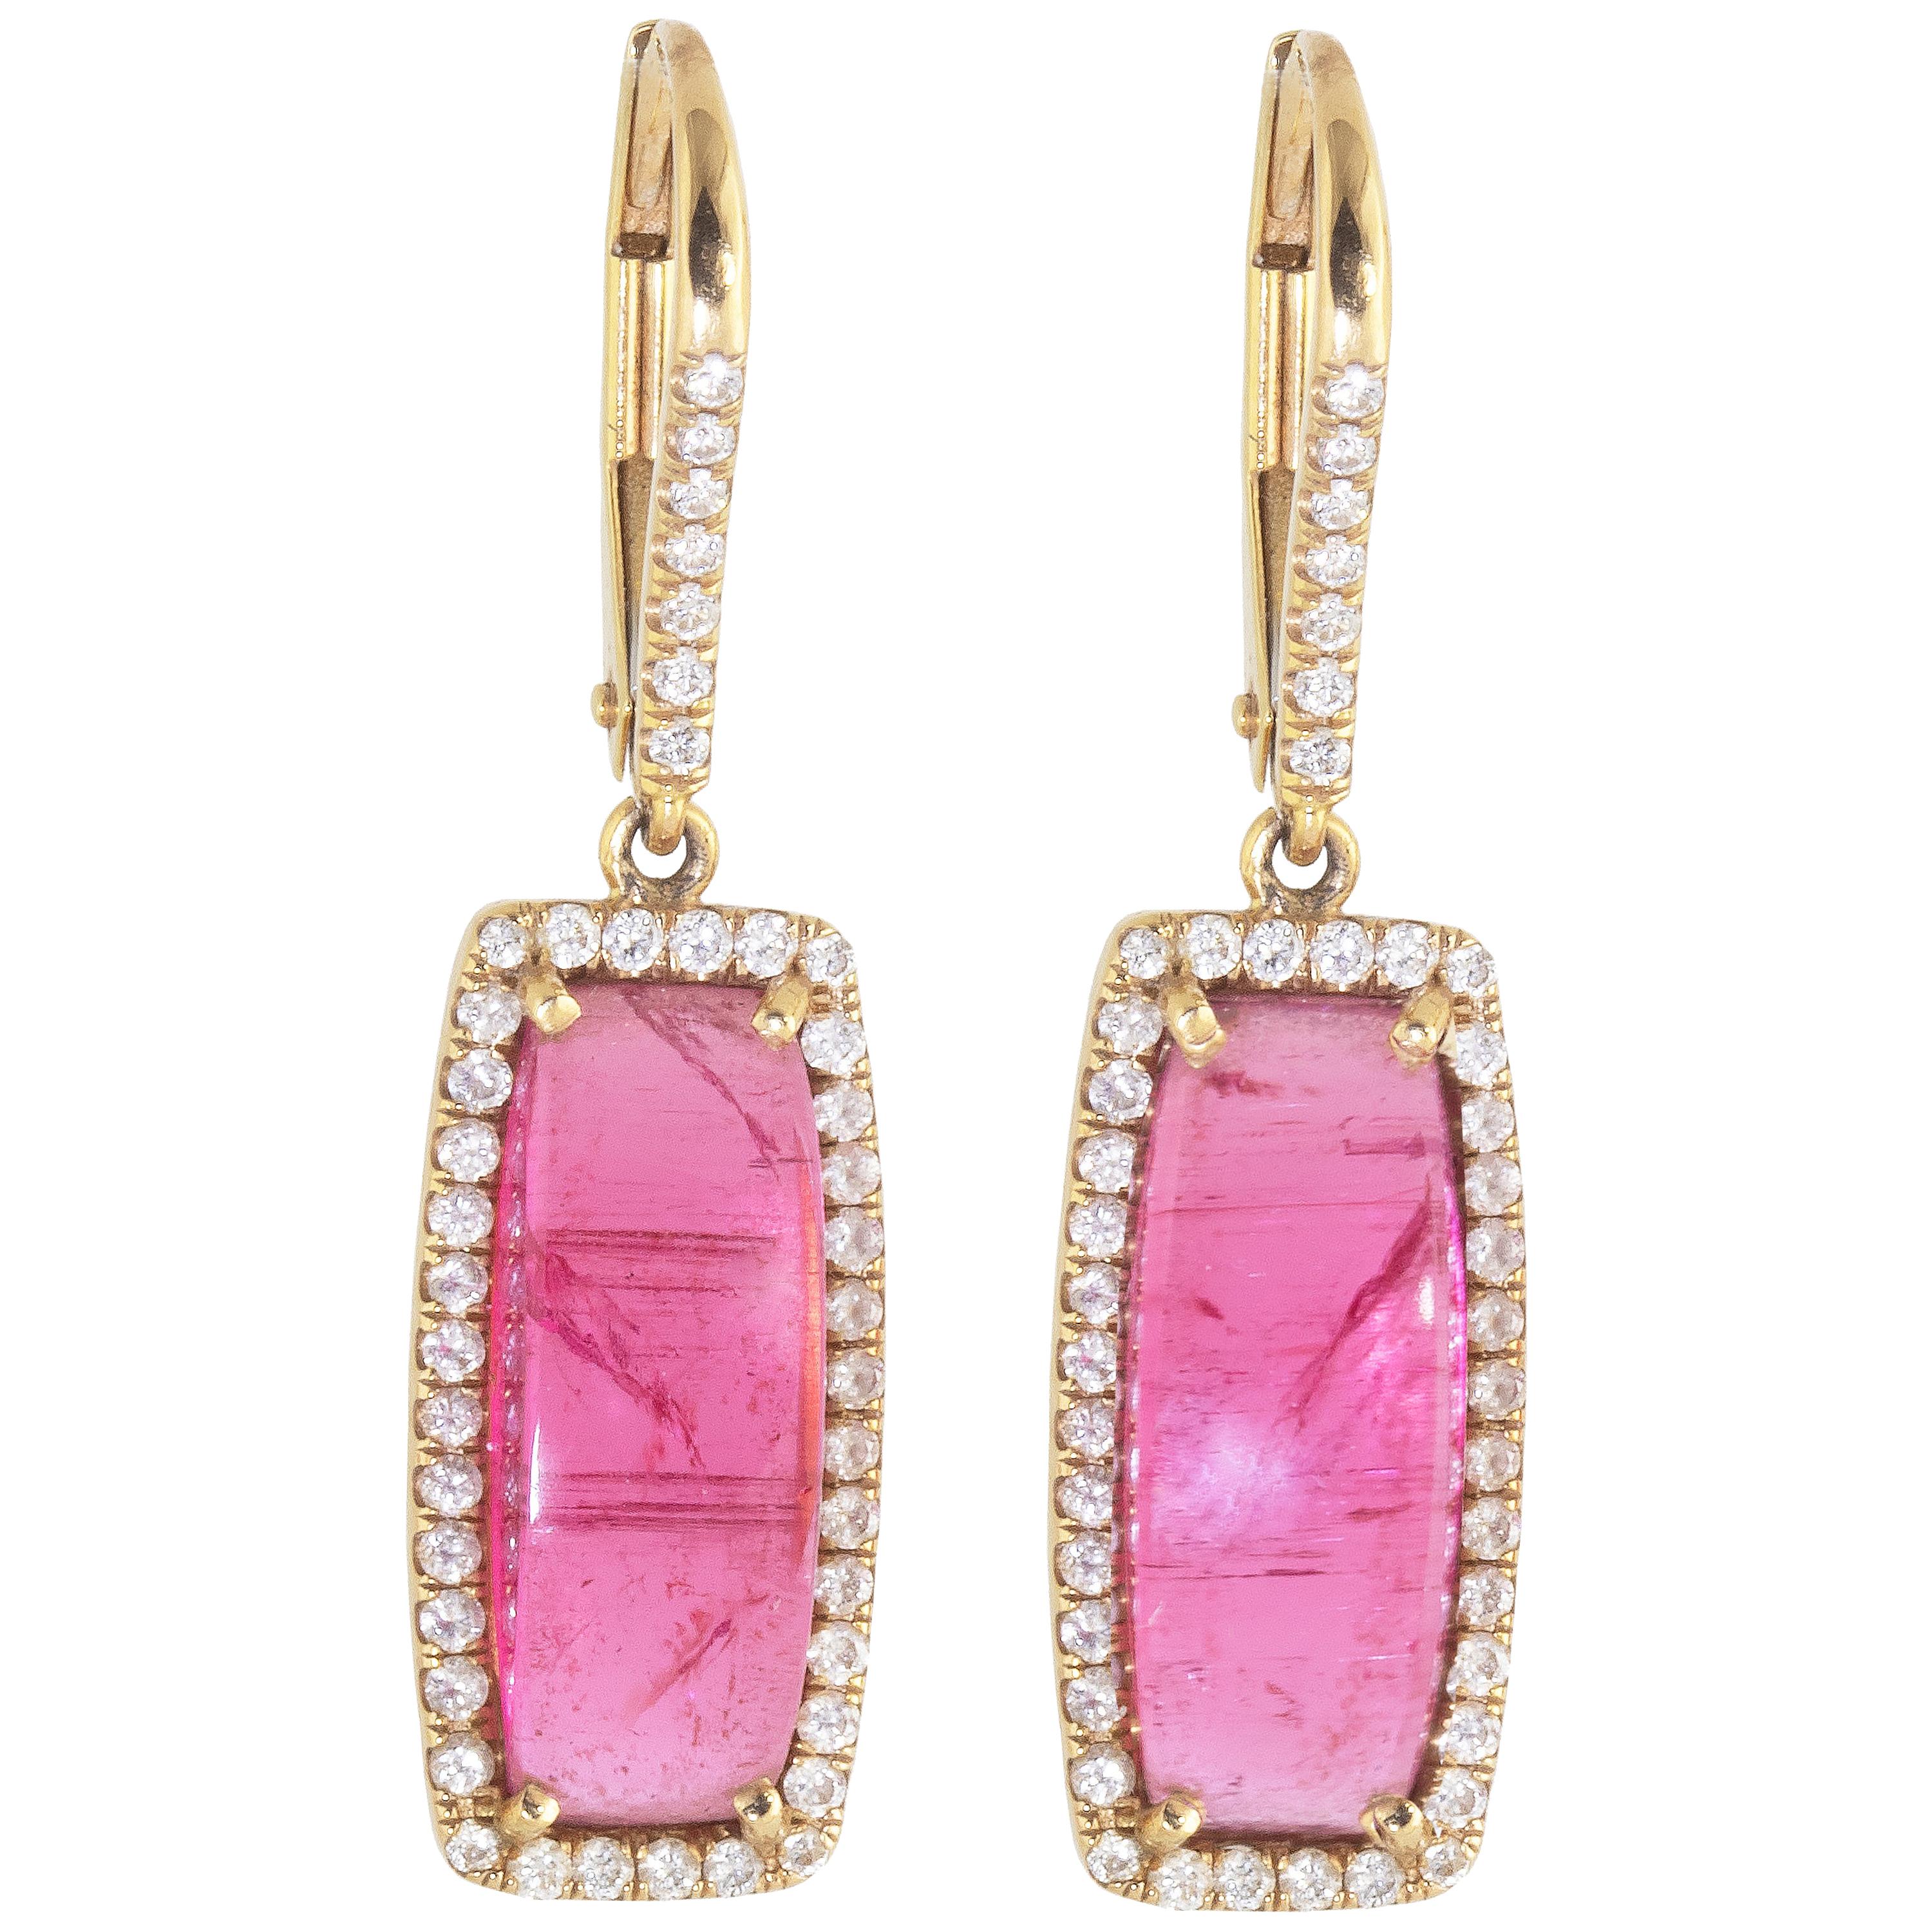 One of a kind Rubellite Tourmaline Cabochon Diamond Earrings set in 18k Rose Gold.  

These earrings were made from a single piece of Rubellite tourmaline which was chosen for its color and luster. The stones are highlighted with a diamond halo